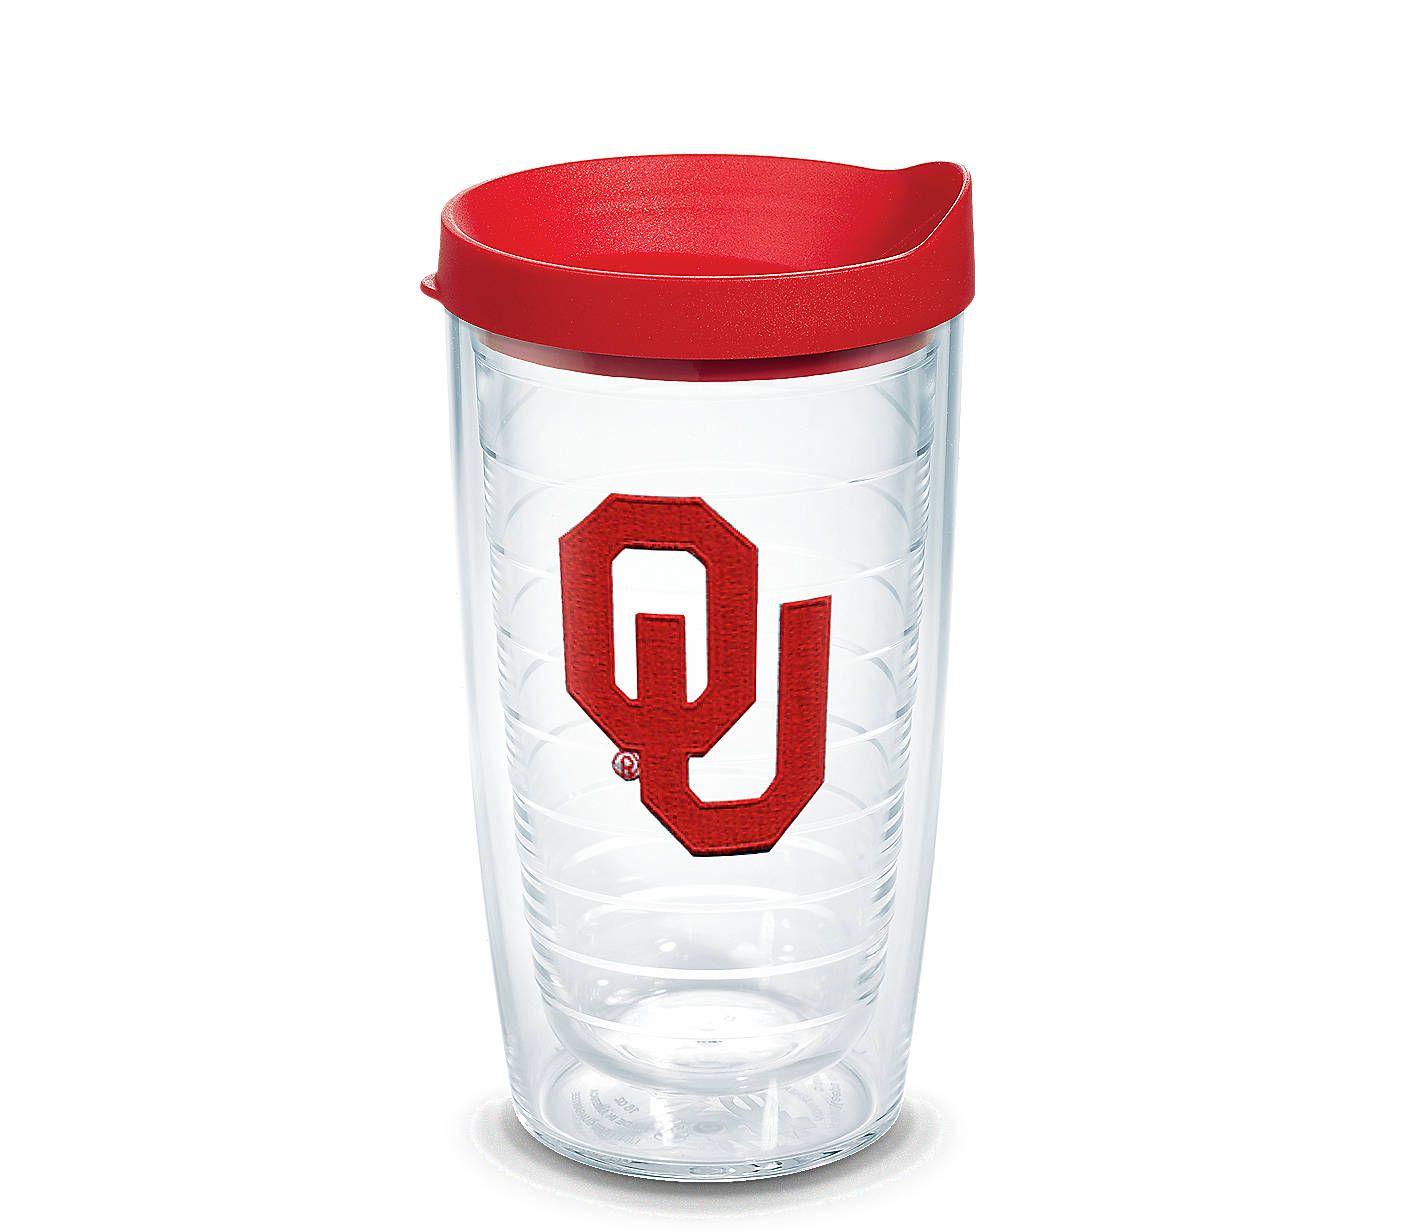 Sooners Logo - Oklahoma Sooners Logo Emblem With Travel Lid | Tervis Official Store